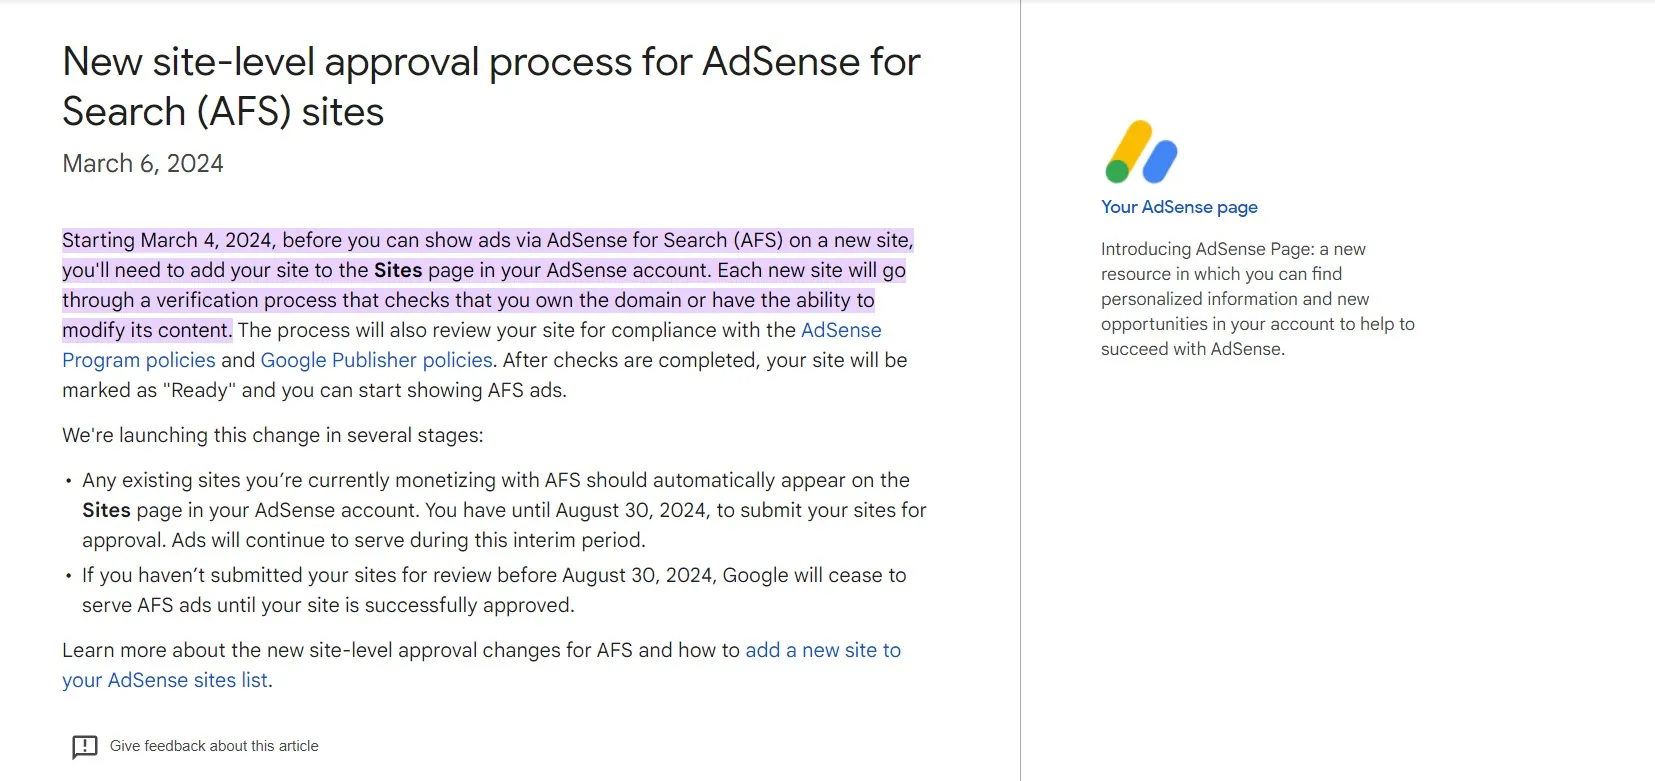 New site-level approval process for AdSense for Search (AFS) sites - official statments